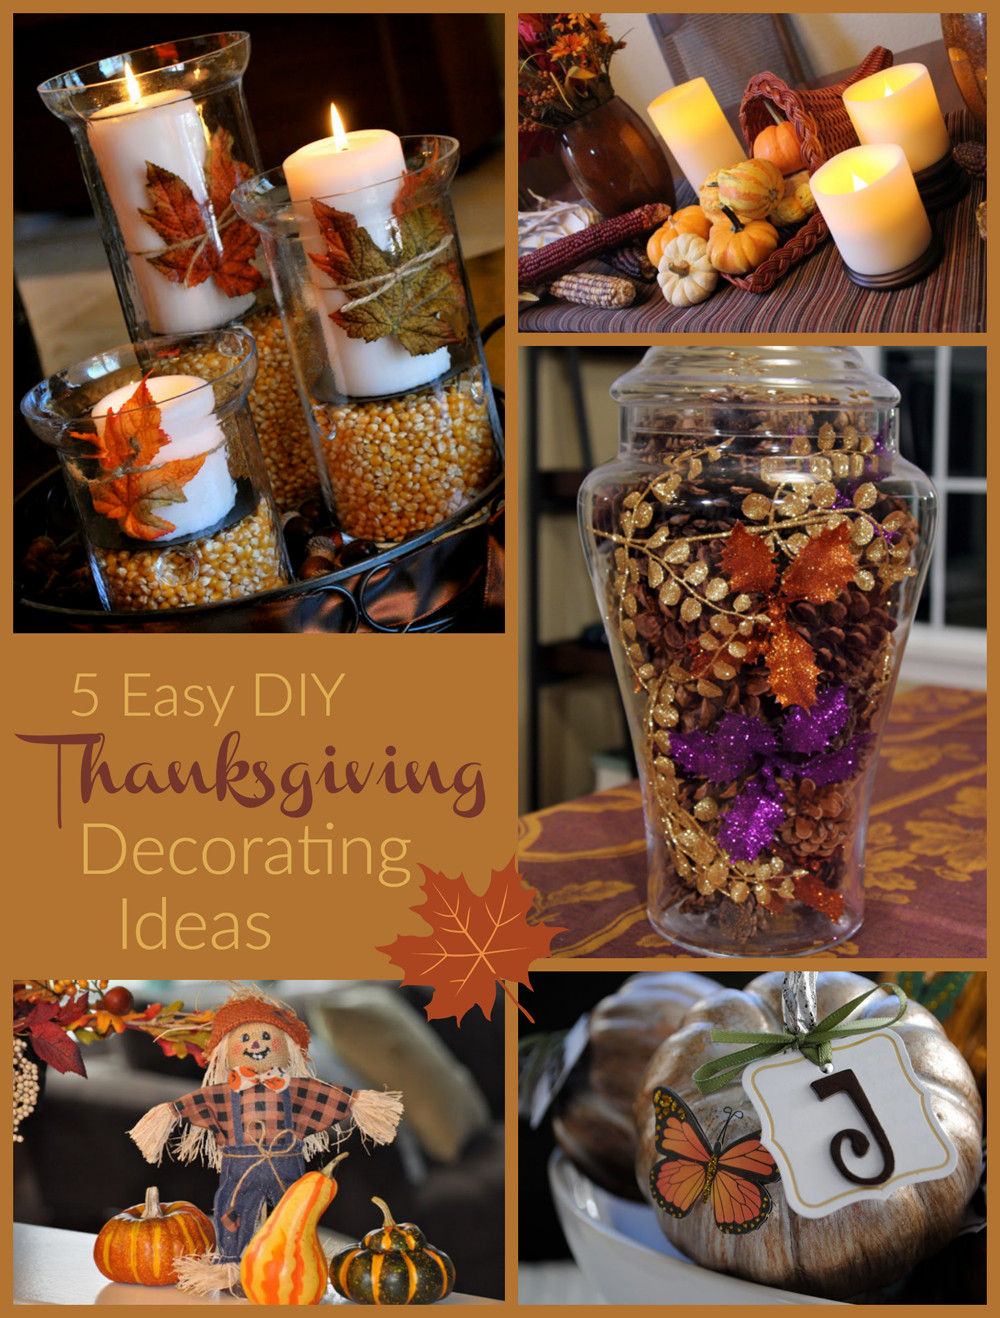 Easy Thanksgiving Table Decorations
 Easy Thanksgiving Decorating Ideas